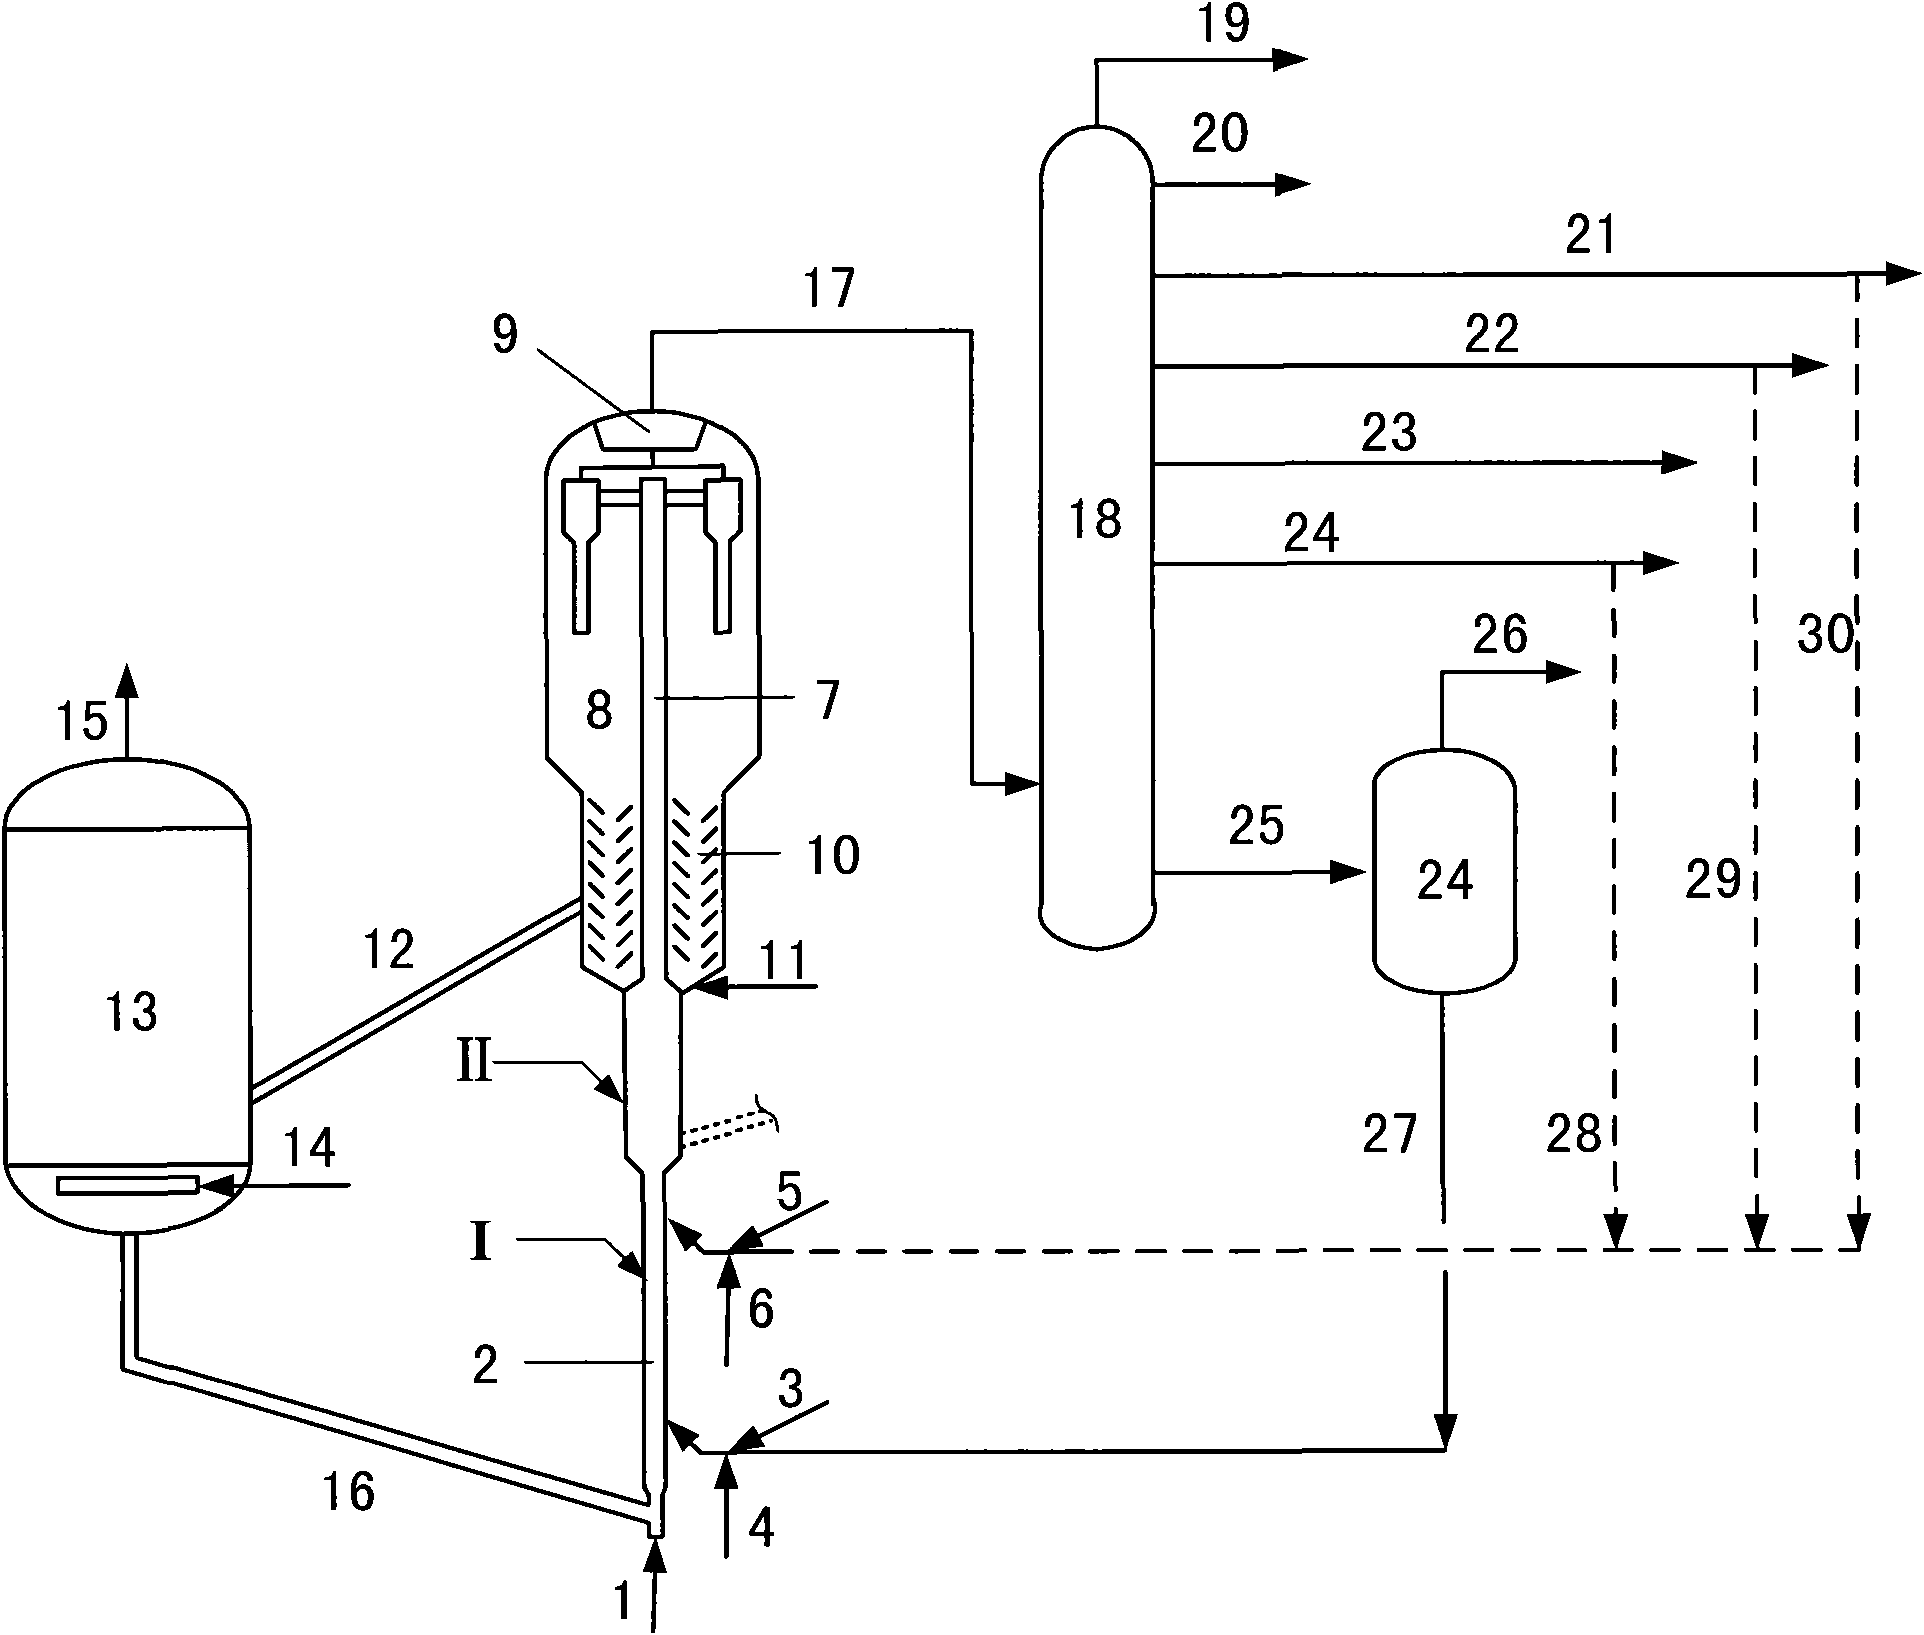 Method for preparing light fuel oil and propylene from inferior raw material oil